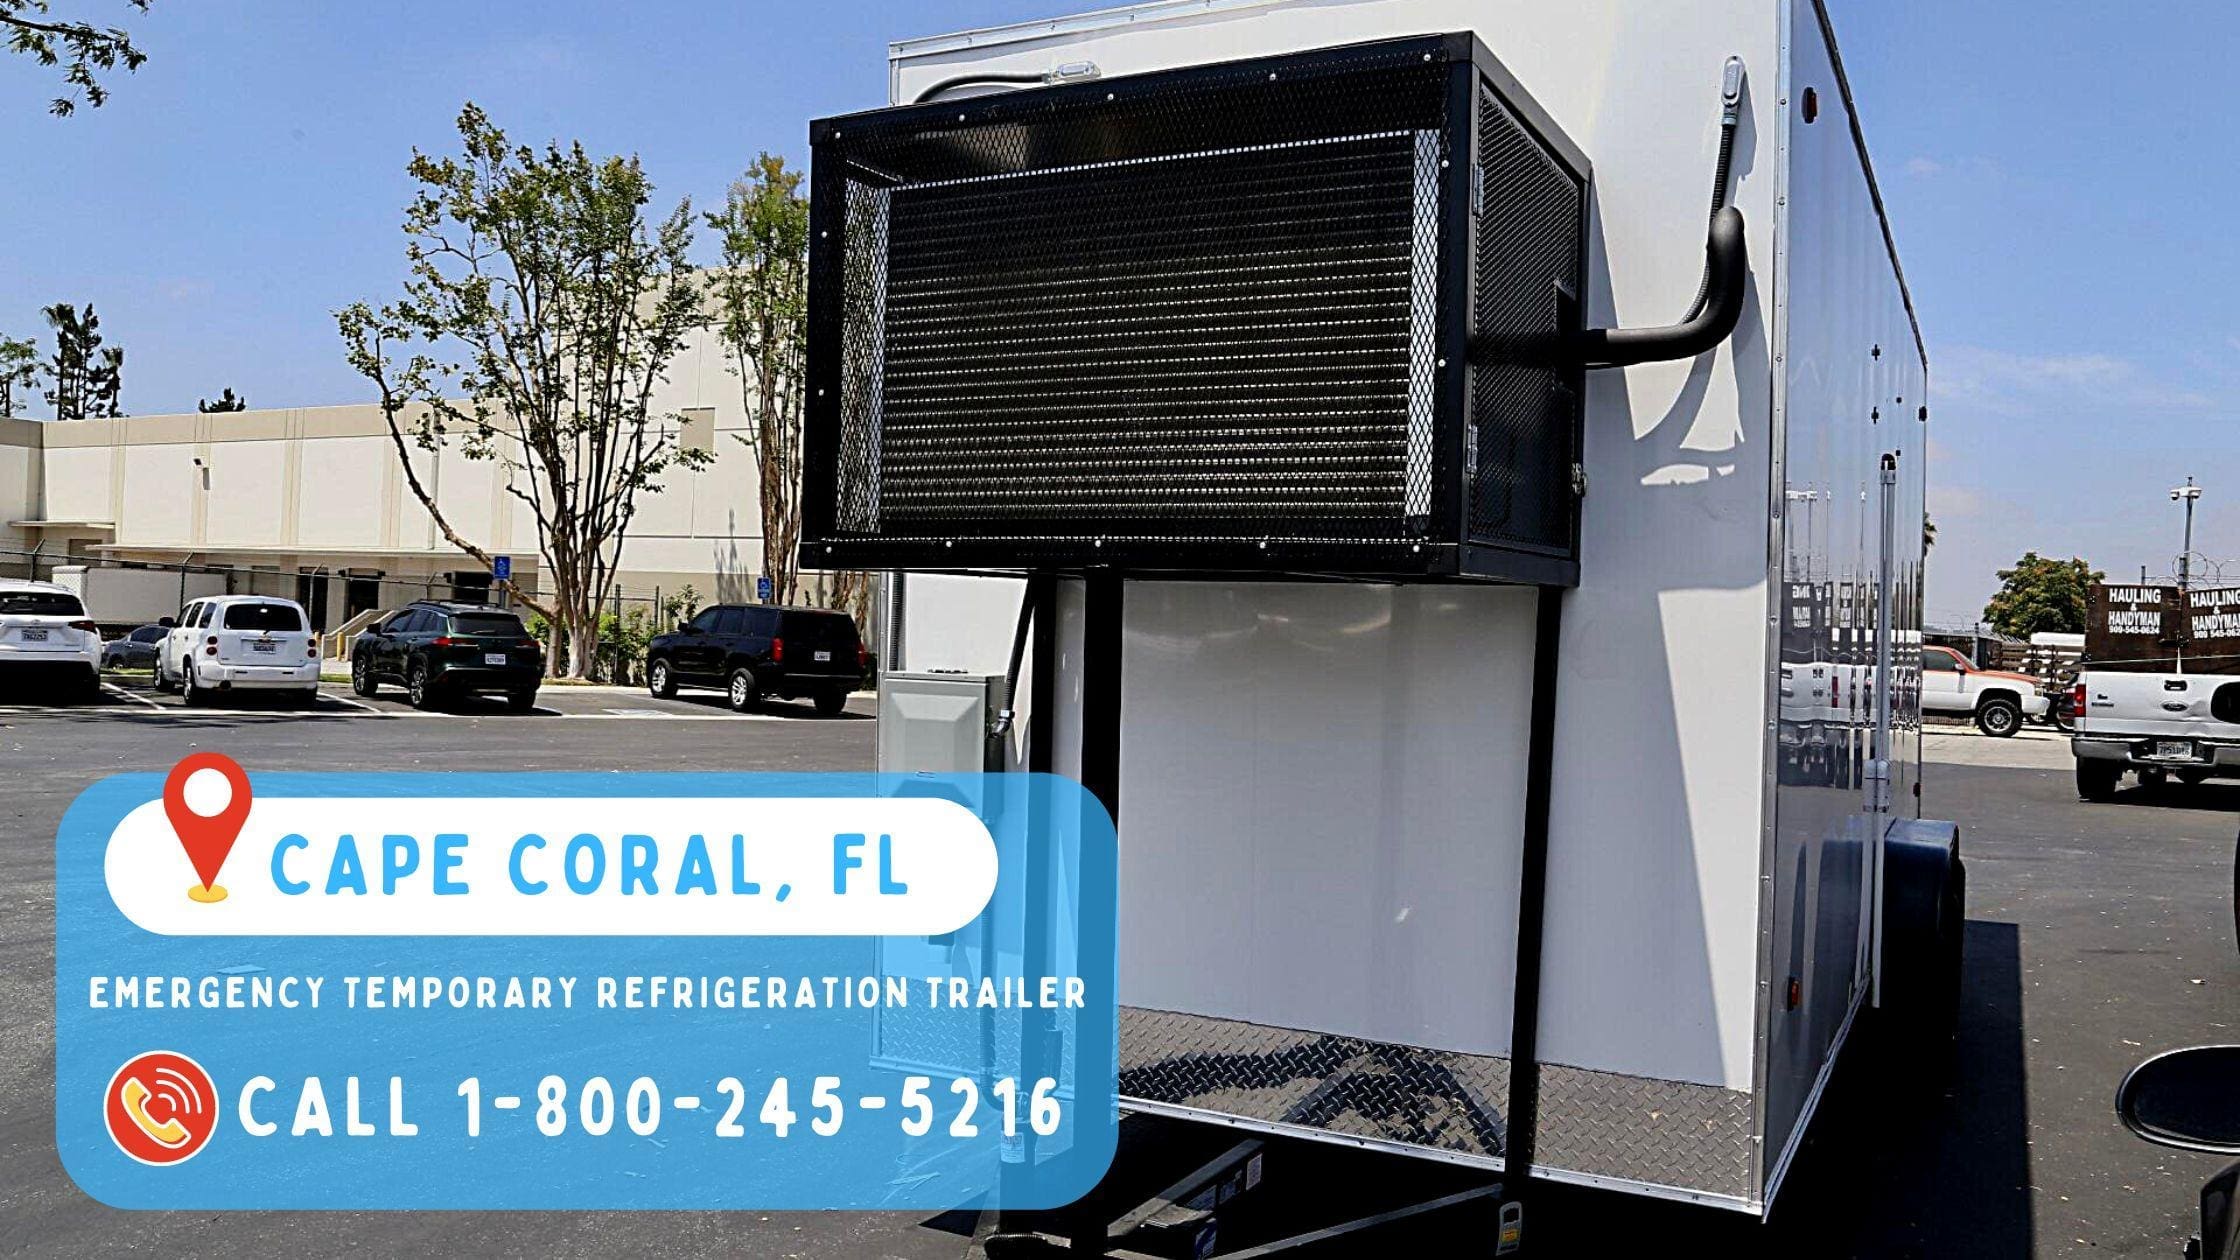 Emergency Temporary refrigeration trailer in Cape Coral